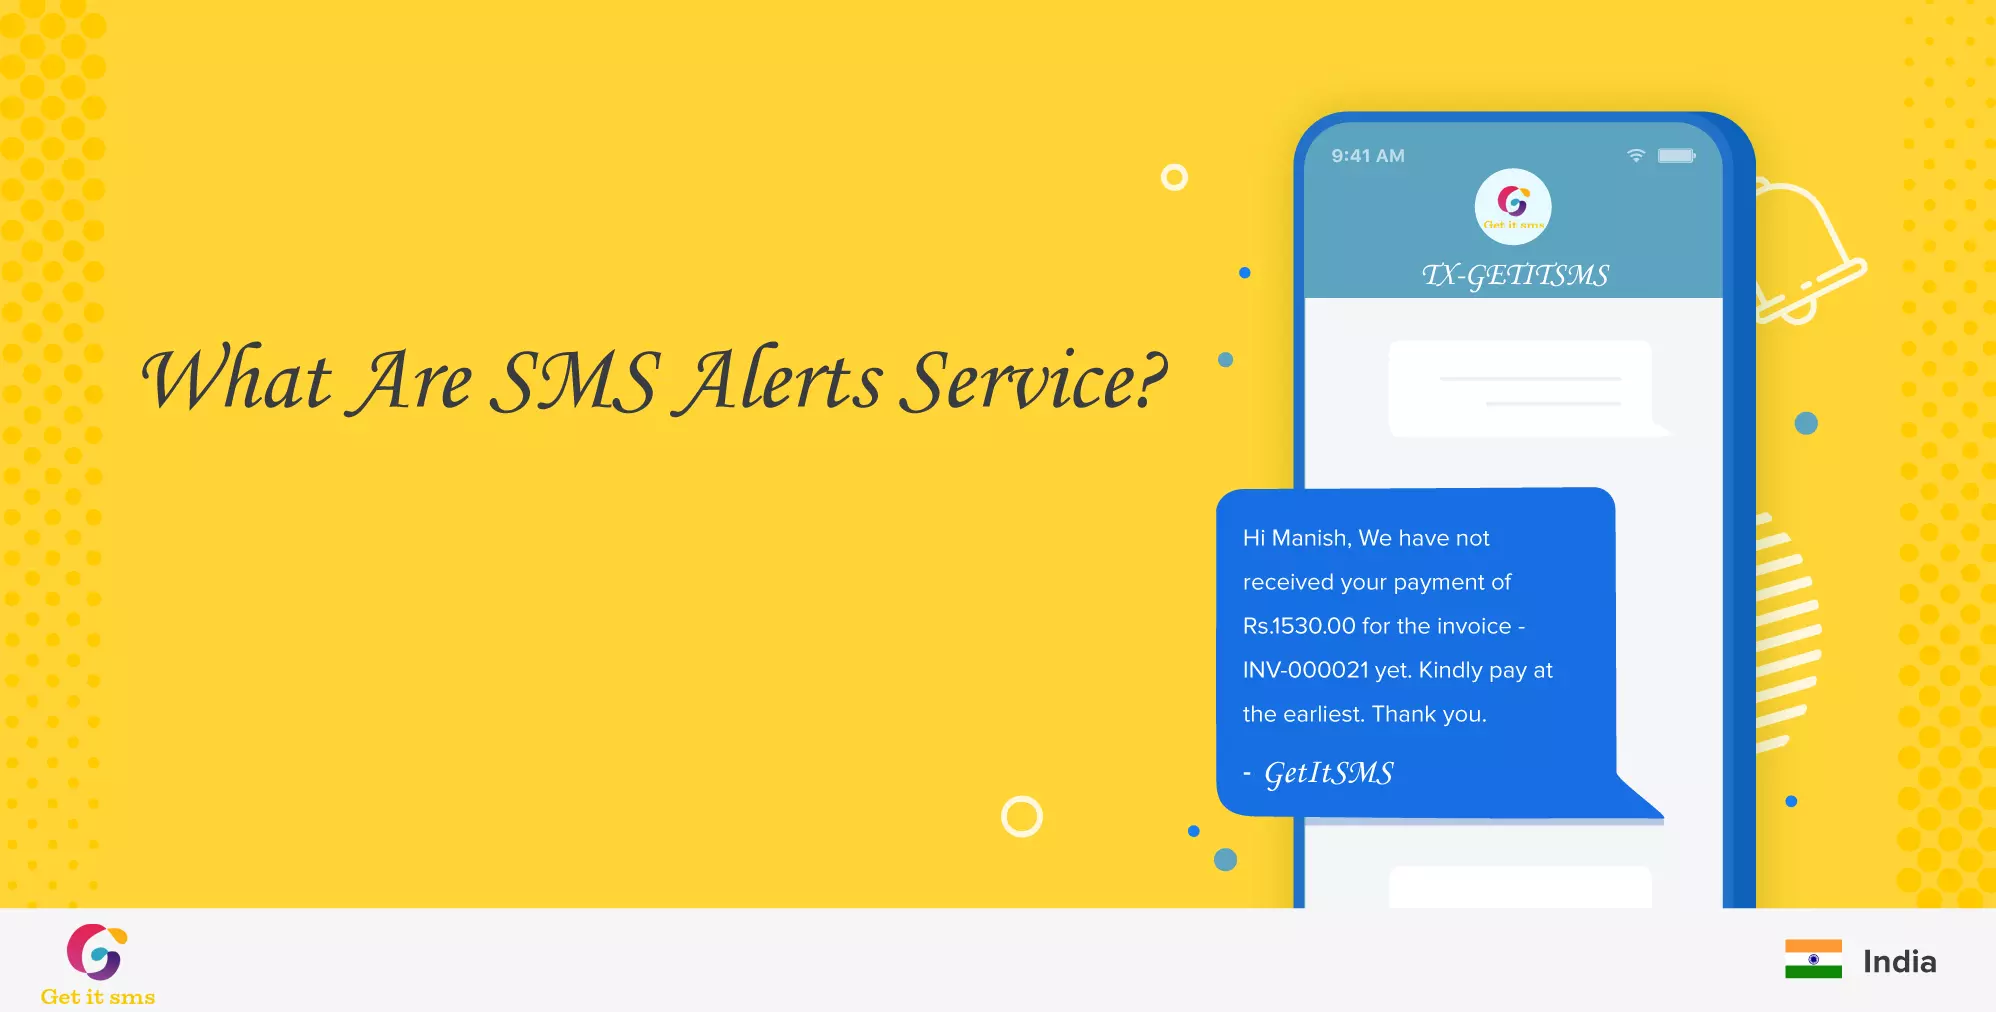 What Are SMS Alerts Service?